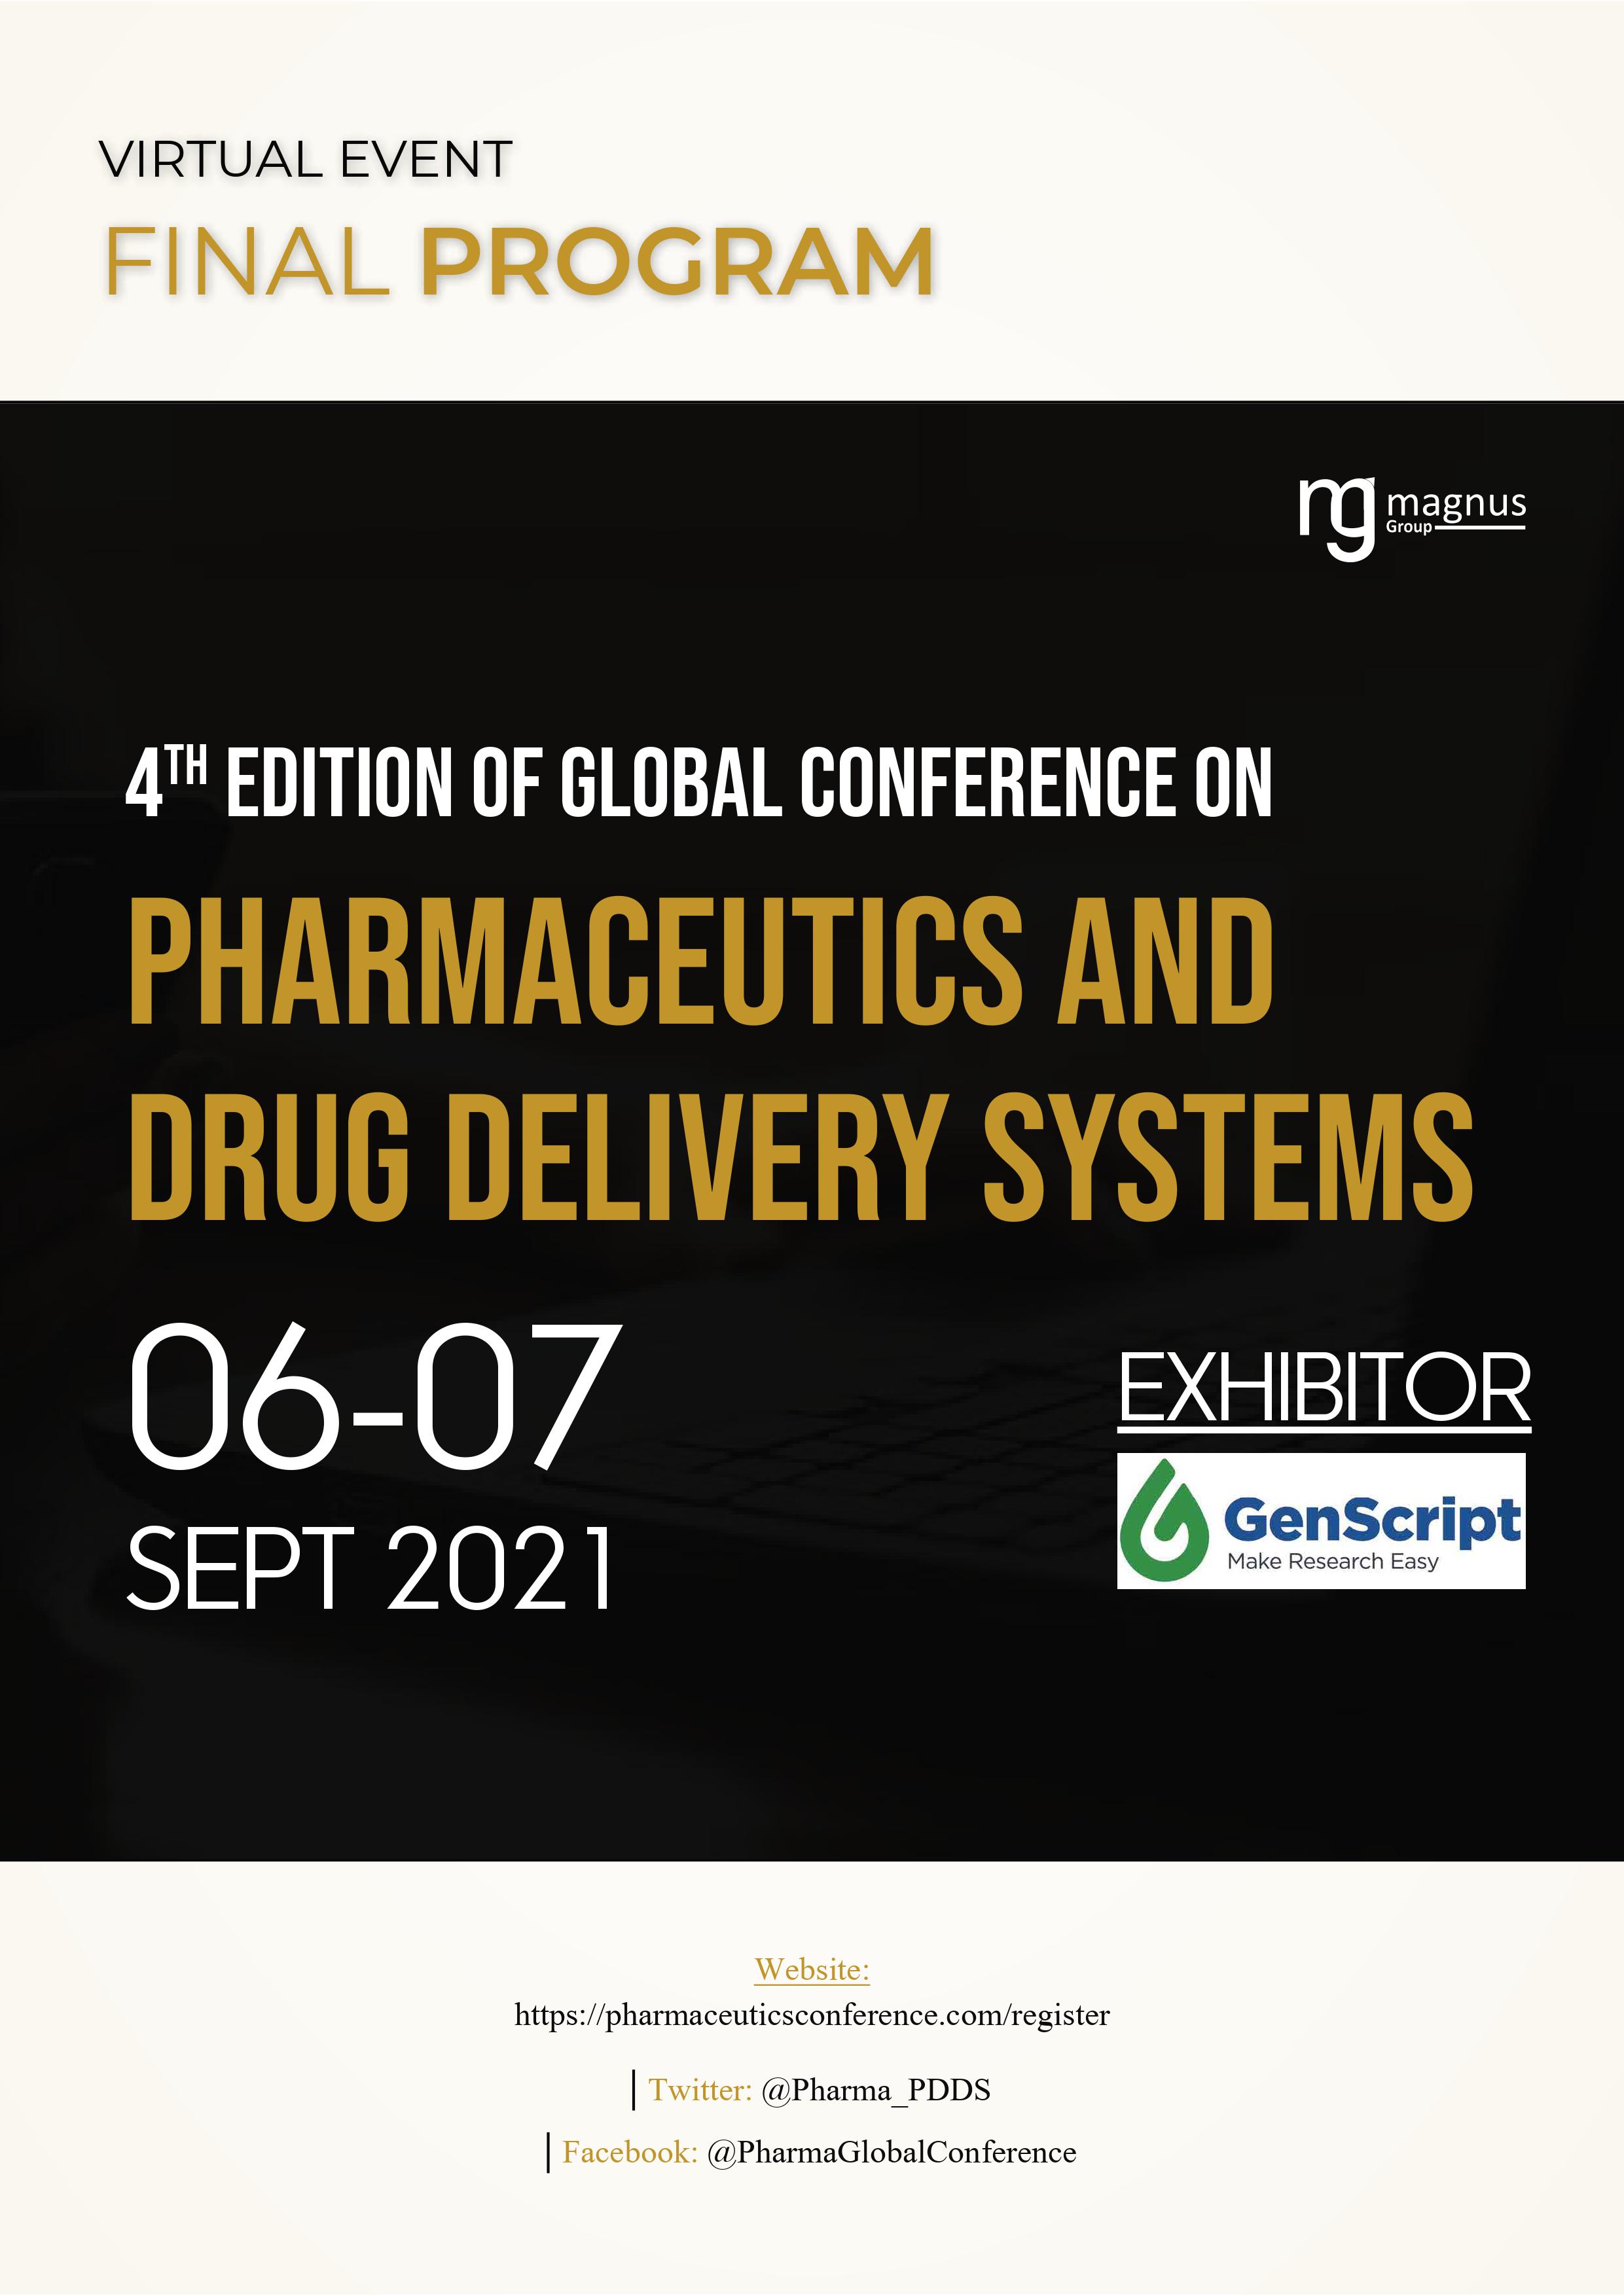 4th Edition of Global conference on Pharmaceutics and Drug Delivery Systems | Rome, Italy Program